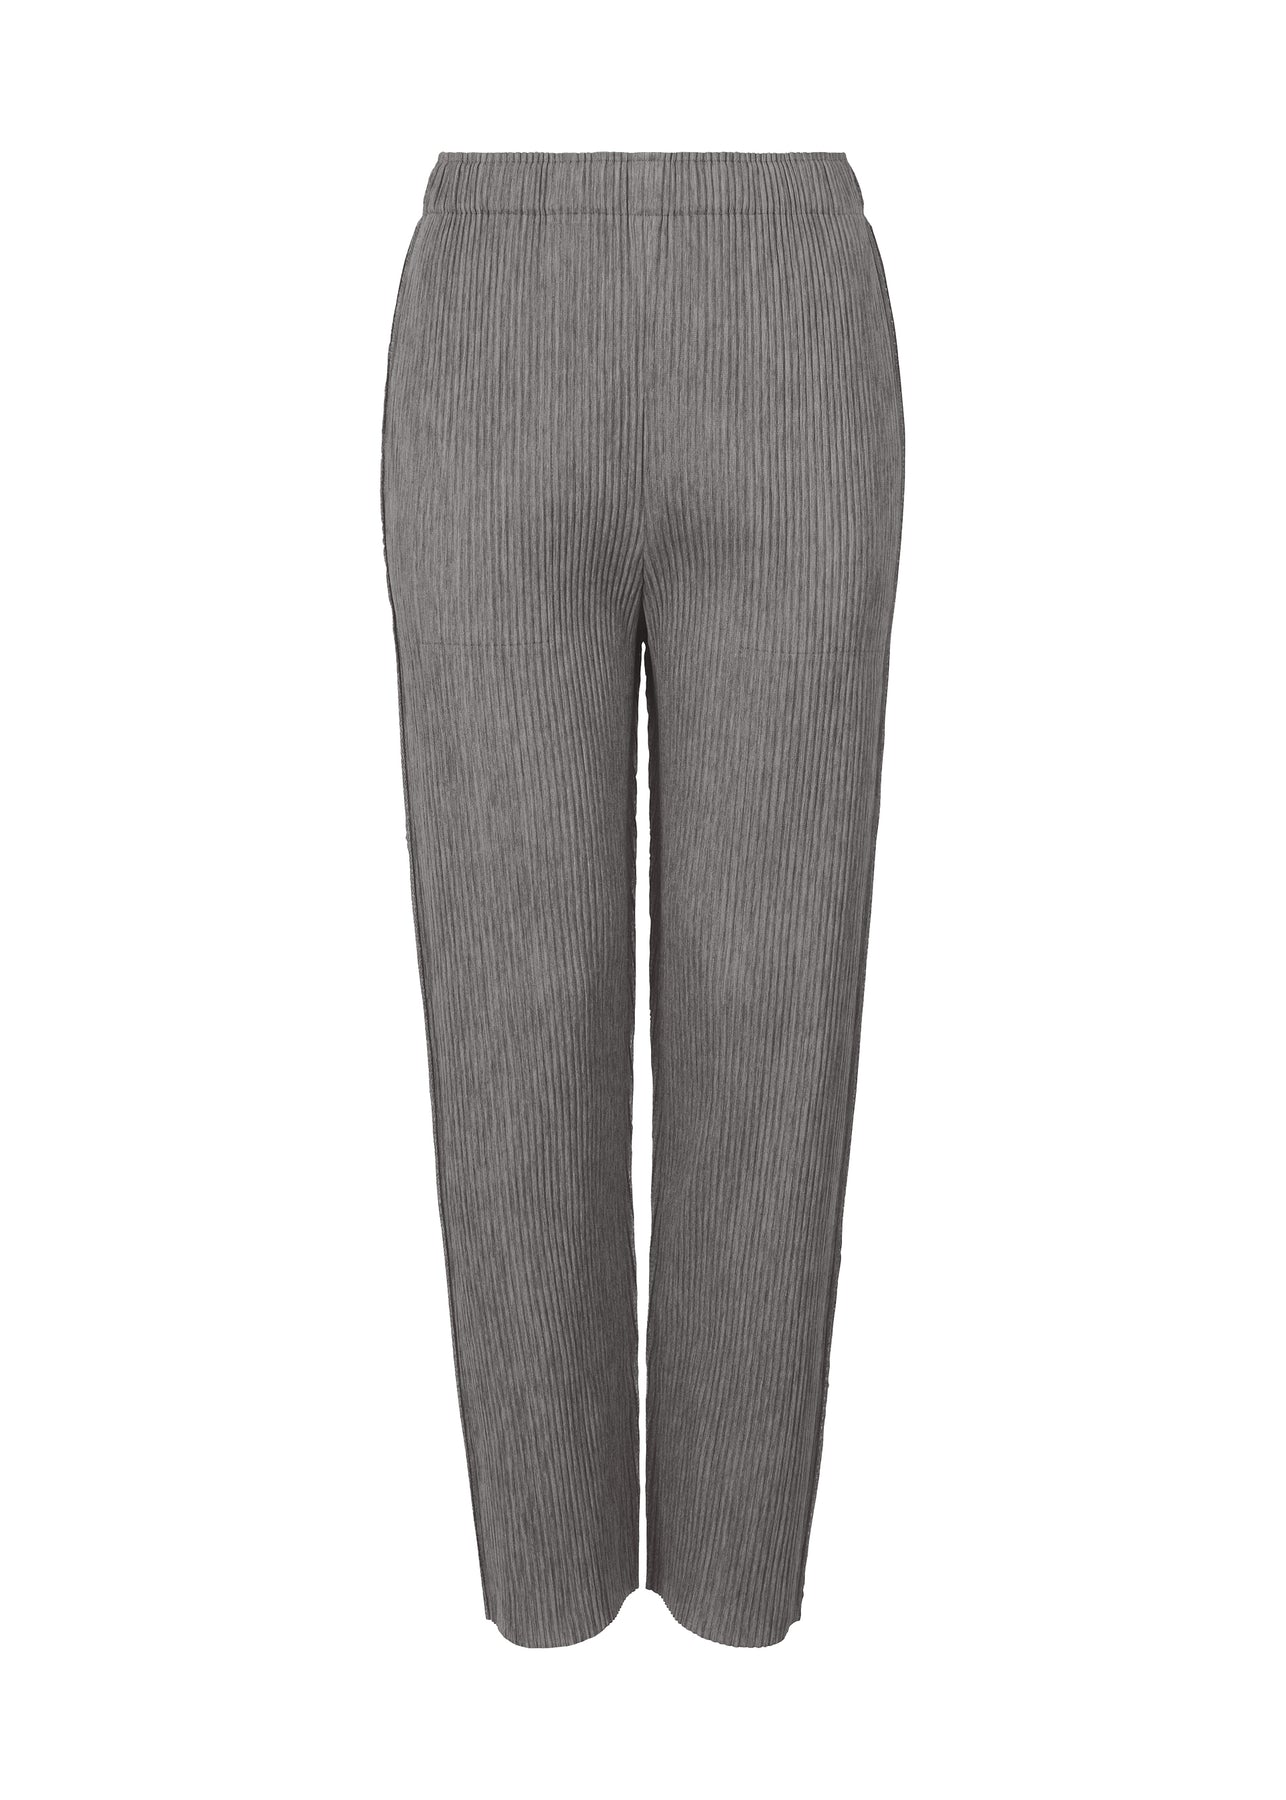 MIX FINE KNIT PLEATS BOTTOM PANTS | The official ISSEY MIYAKE ONLINE STORE  | ISSEY MIYAKE USA